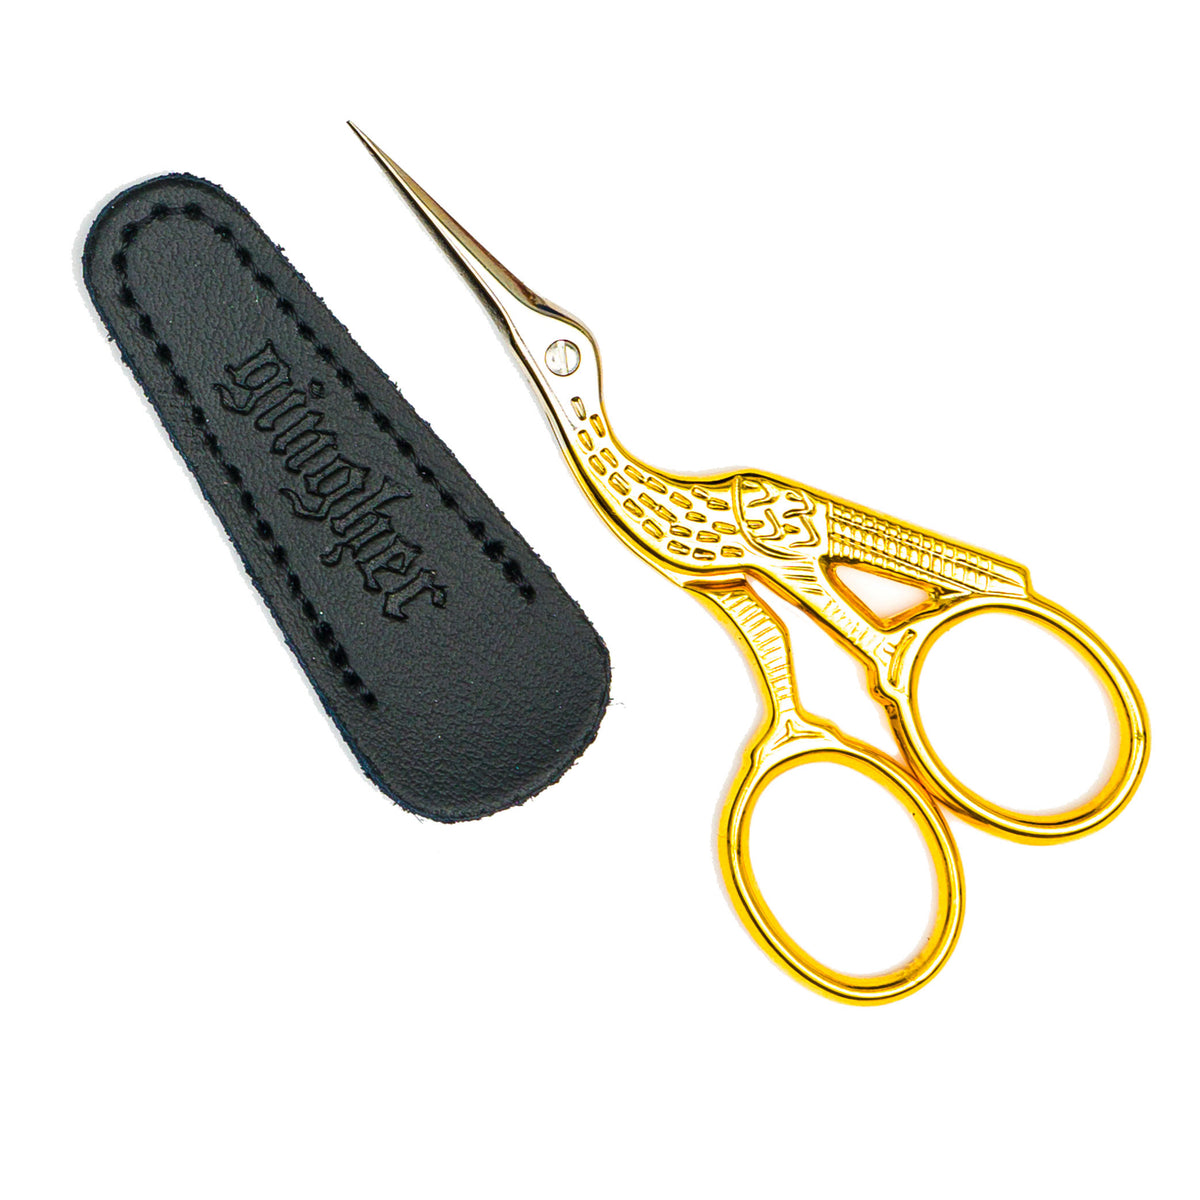 Needlepoint Scissors Collection - Lycette Designs